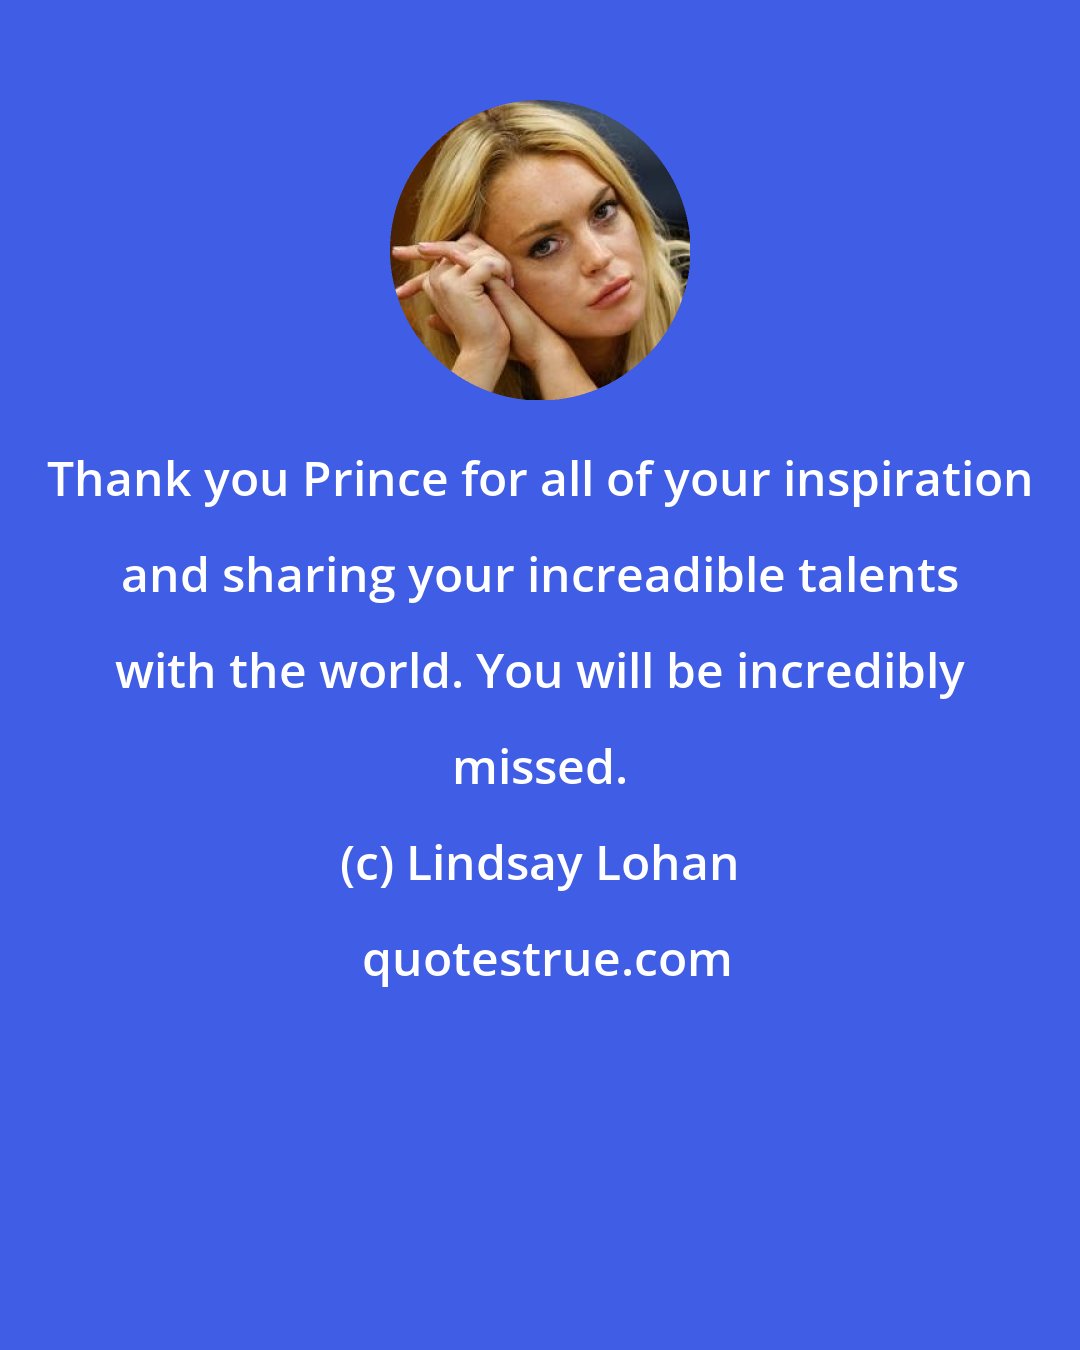 Lindsay Lohan: Thank you Prince for all of your inspiration and sharing your increadible talents with the world. You will be incredibly missed.